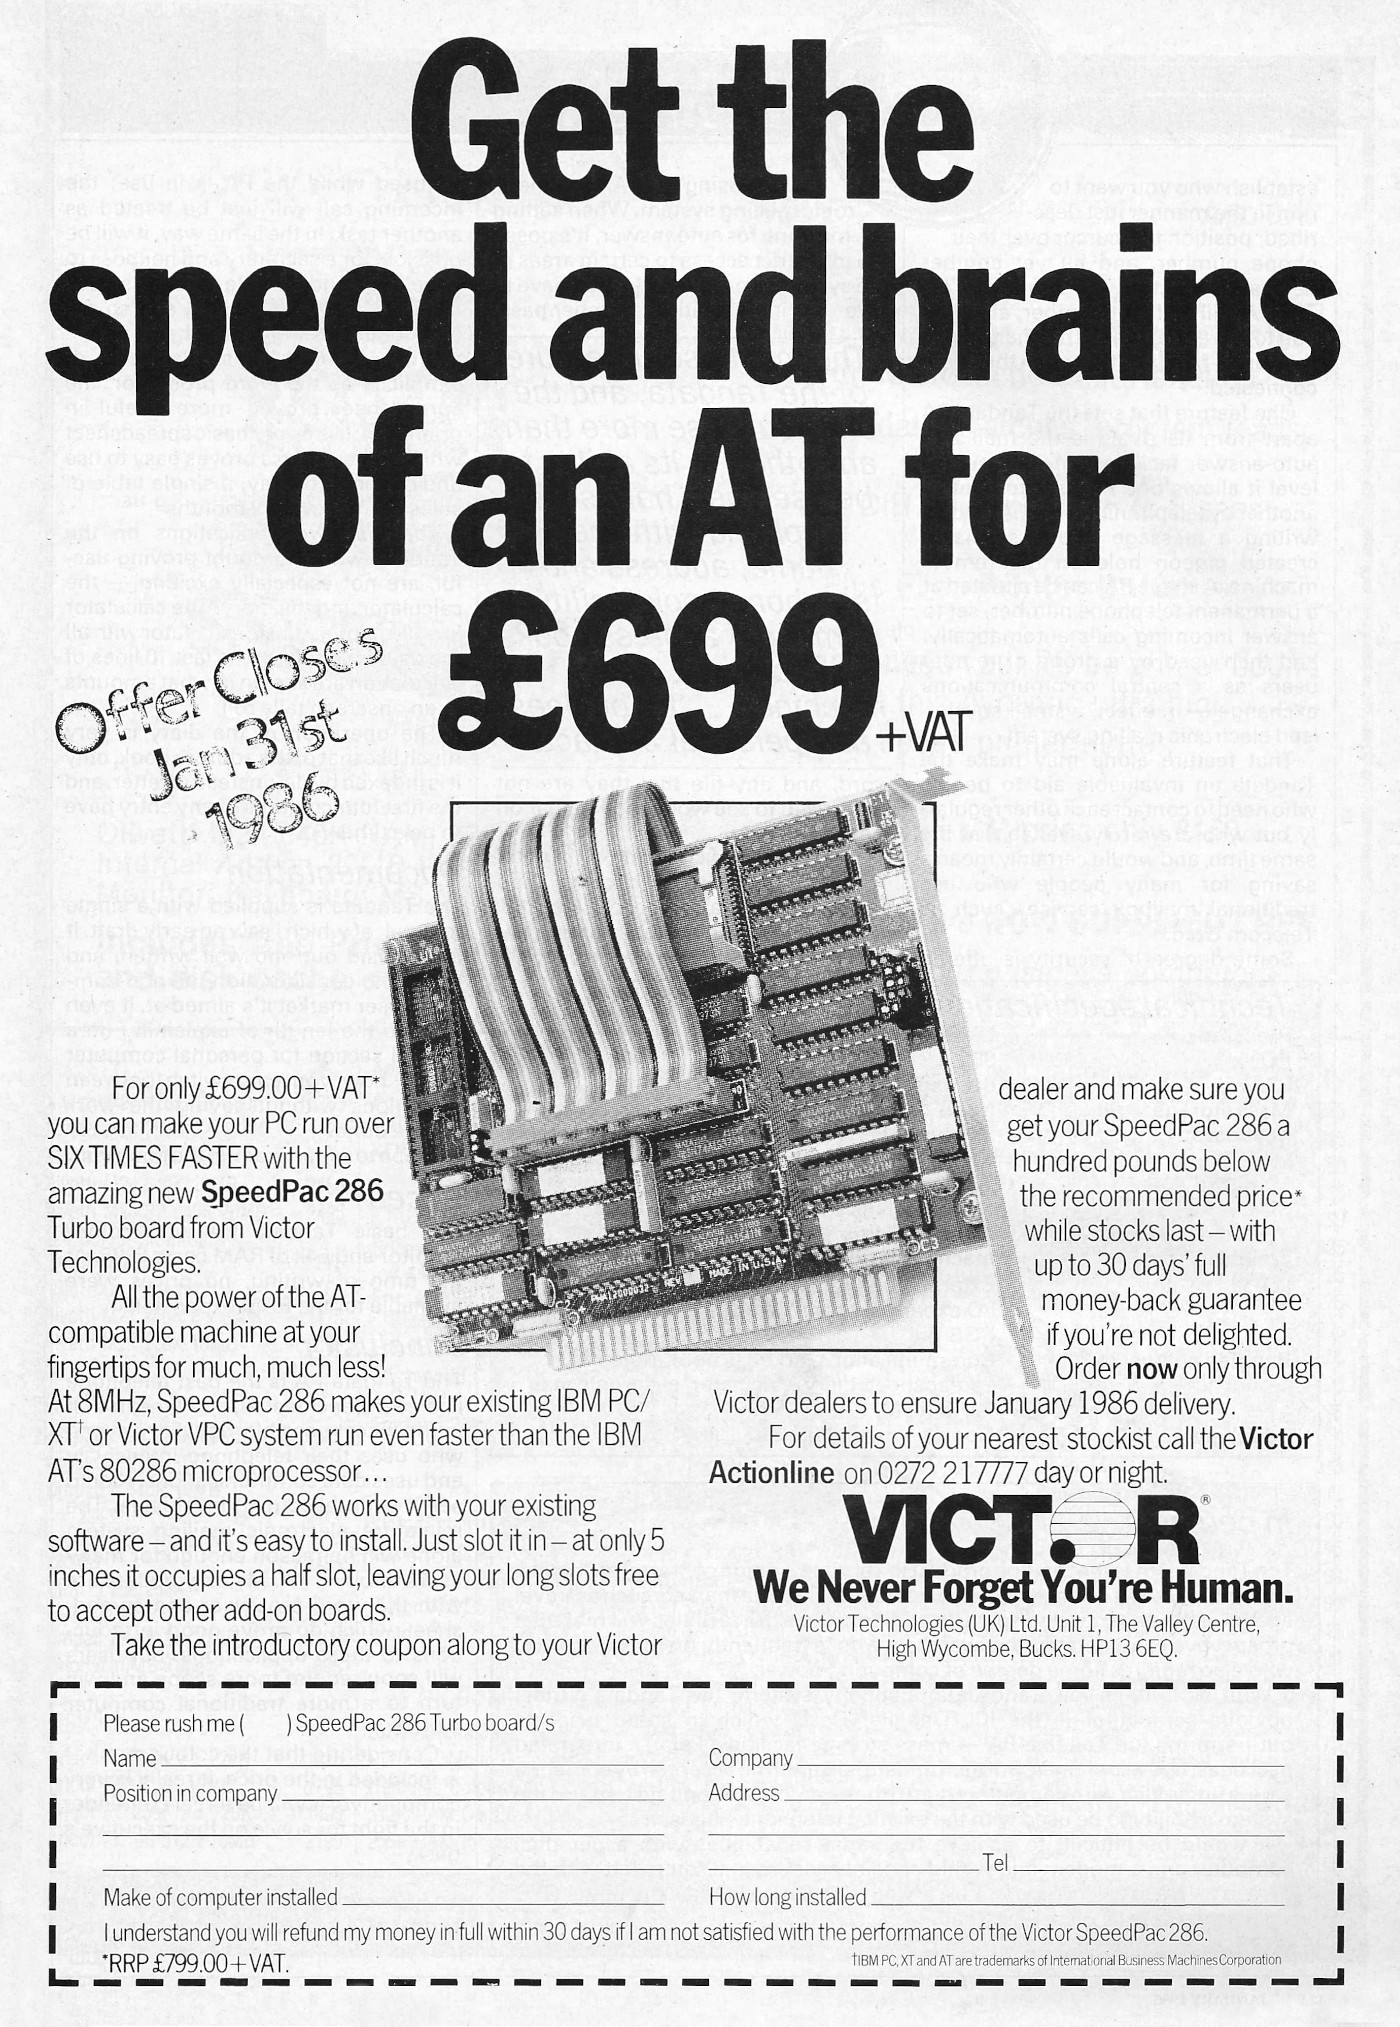 An advert for the Victor SpeedPac 286, showing that the company didn't just sell PCs. The Intel 80286-based plug-in card was sold as an AT-compatible second processor, which because it didn't have to also run the rest of the computer, actually ran faster than the IBM AT. It retailed for £699 + VAT, or around £2,720 in 2024, which was about £400 less than buying a new PC